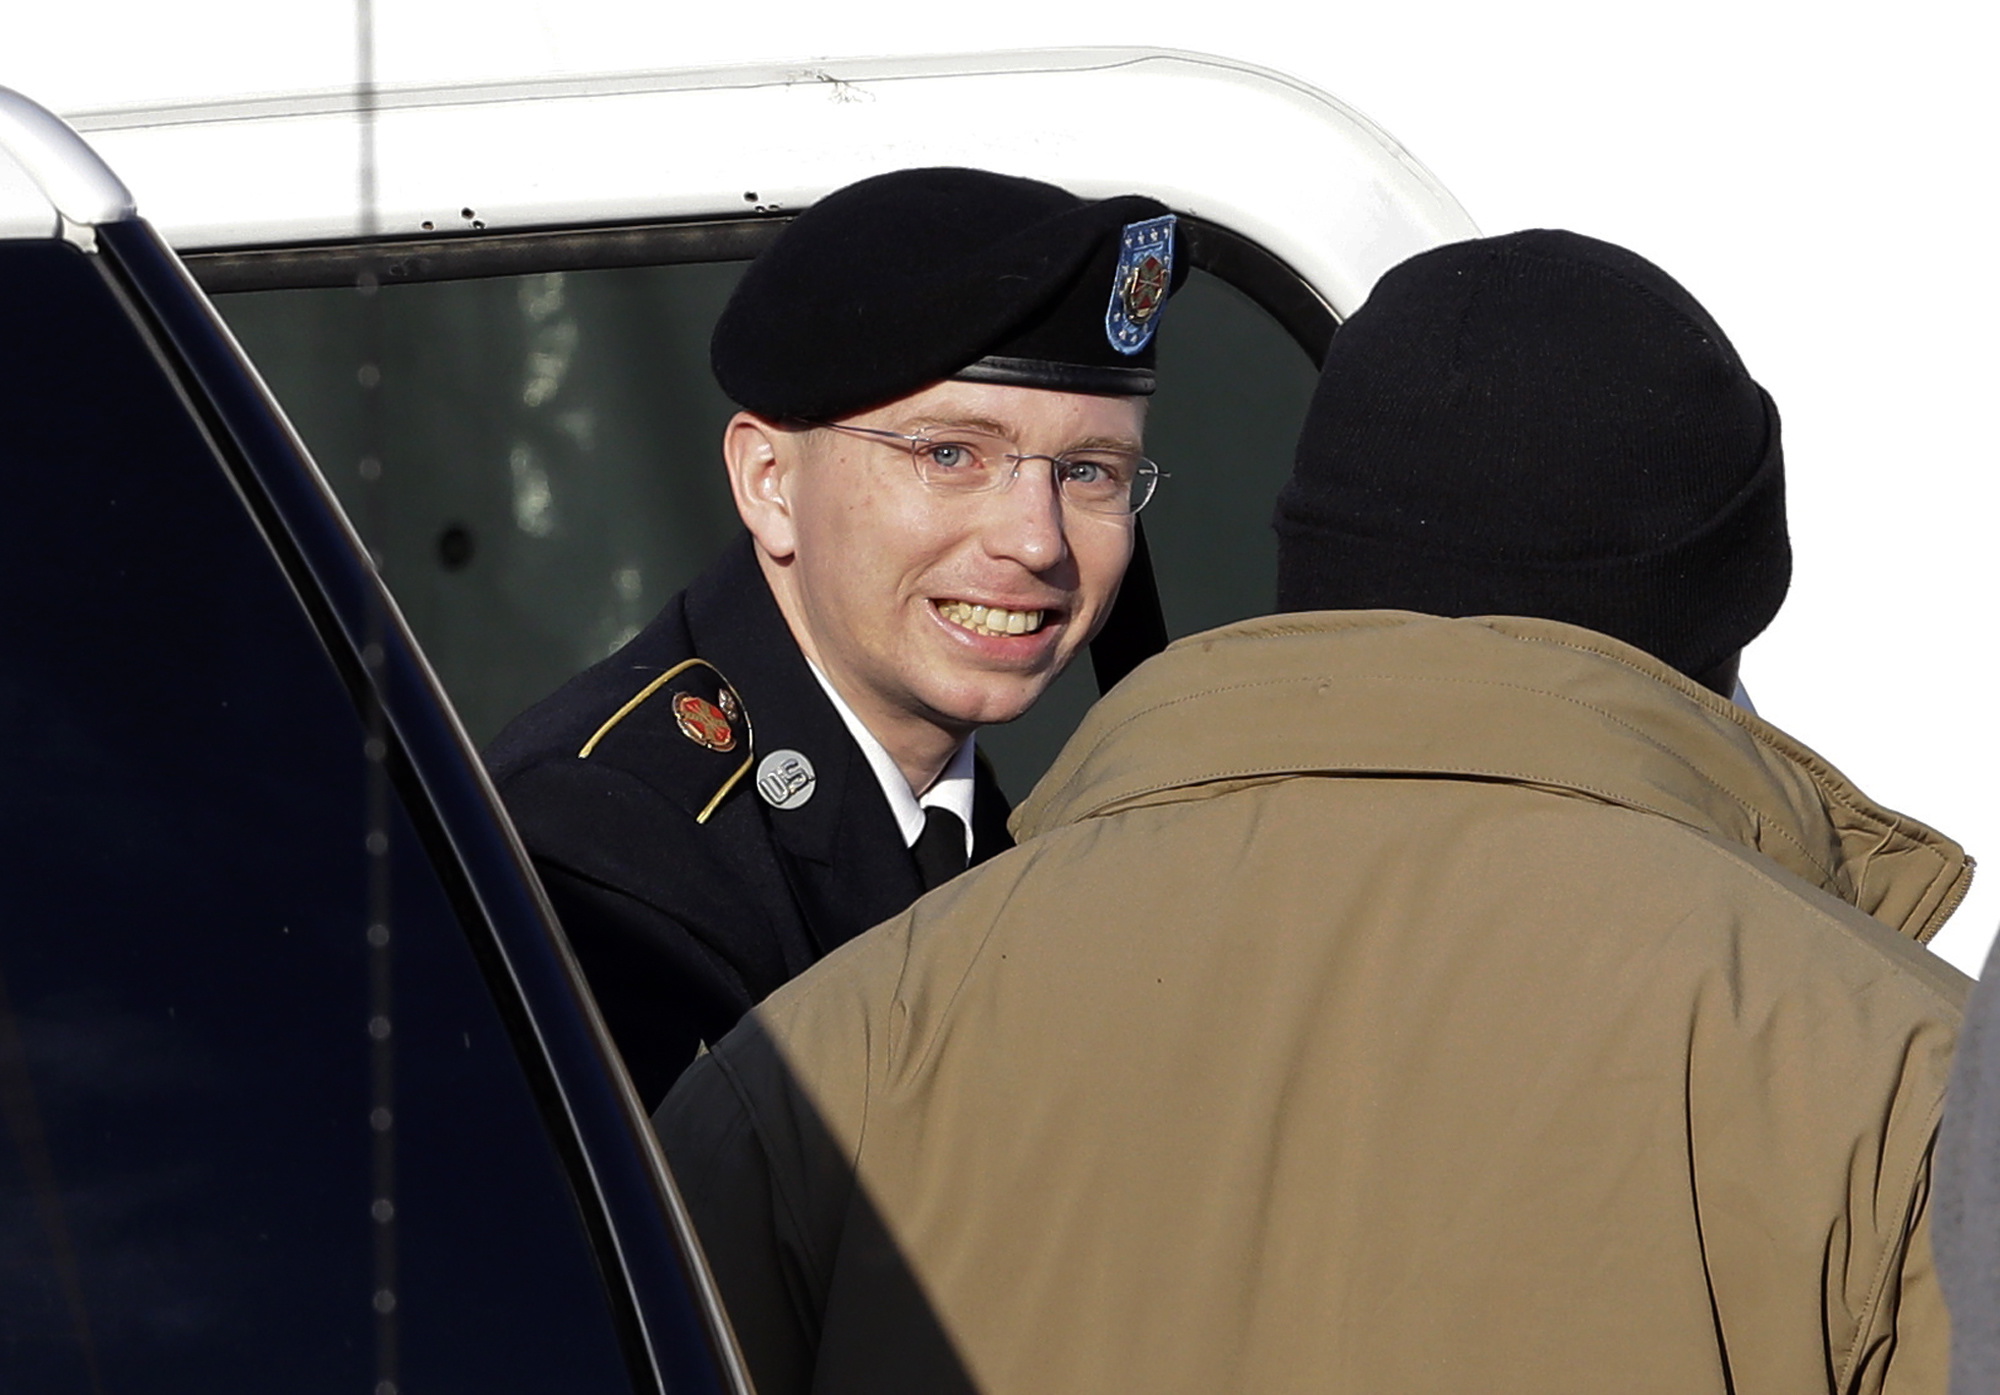 Army Pfc. Bradley Manning, center, steps out of a security vehicle as he is escorted into a courthouse in Fort Meade, Md., on Nov.